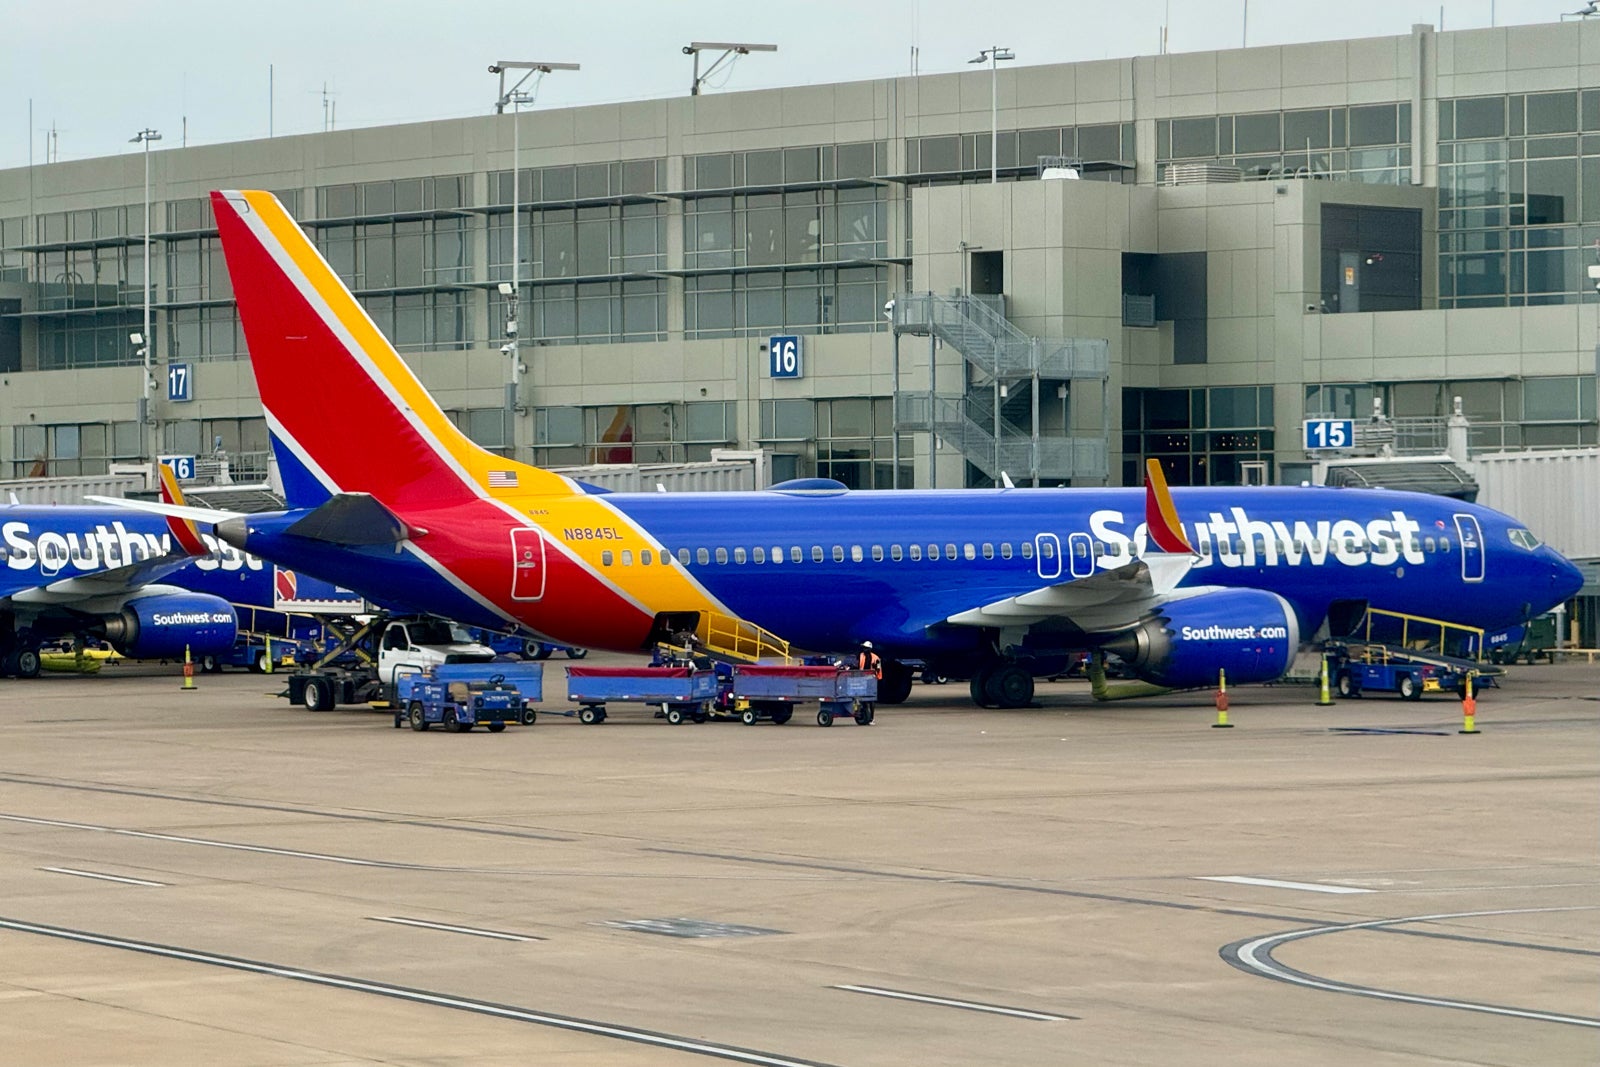 southwest adds 4 new routes, cuts 2 others in latest network adjustment